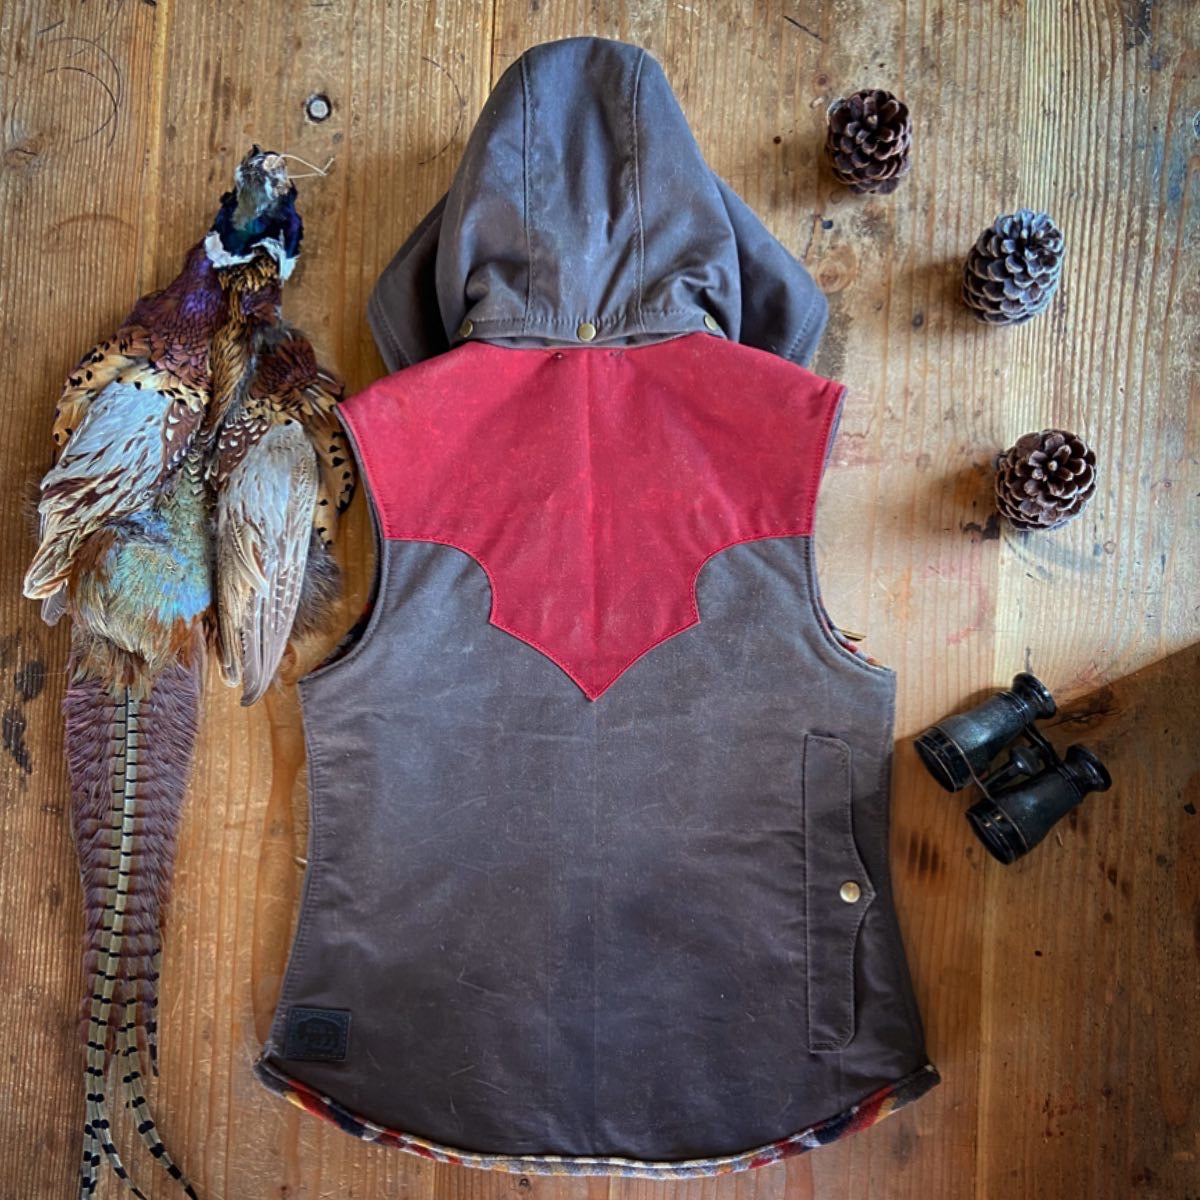 Filson - Horseshoes protect hooves. Our Wax Work Vest protects you